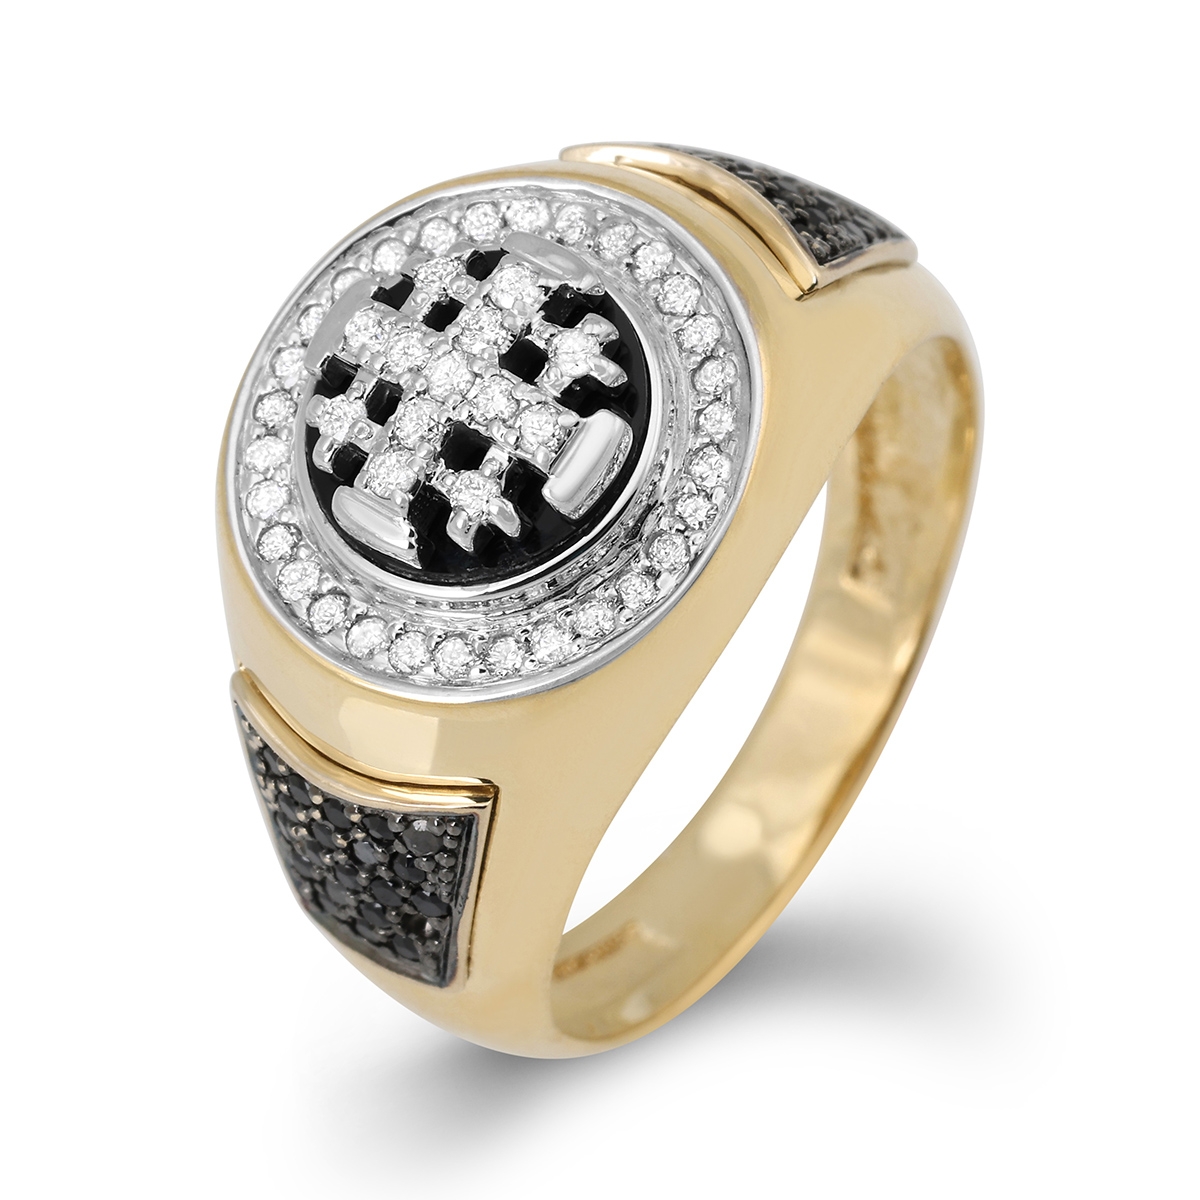 Anbinder Jewelry 14K Gold Luxurious Jerusalem Cross Ring with White and Black Diamonds and Black Enamel - 1